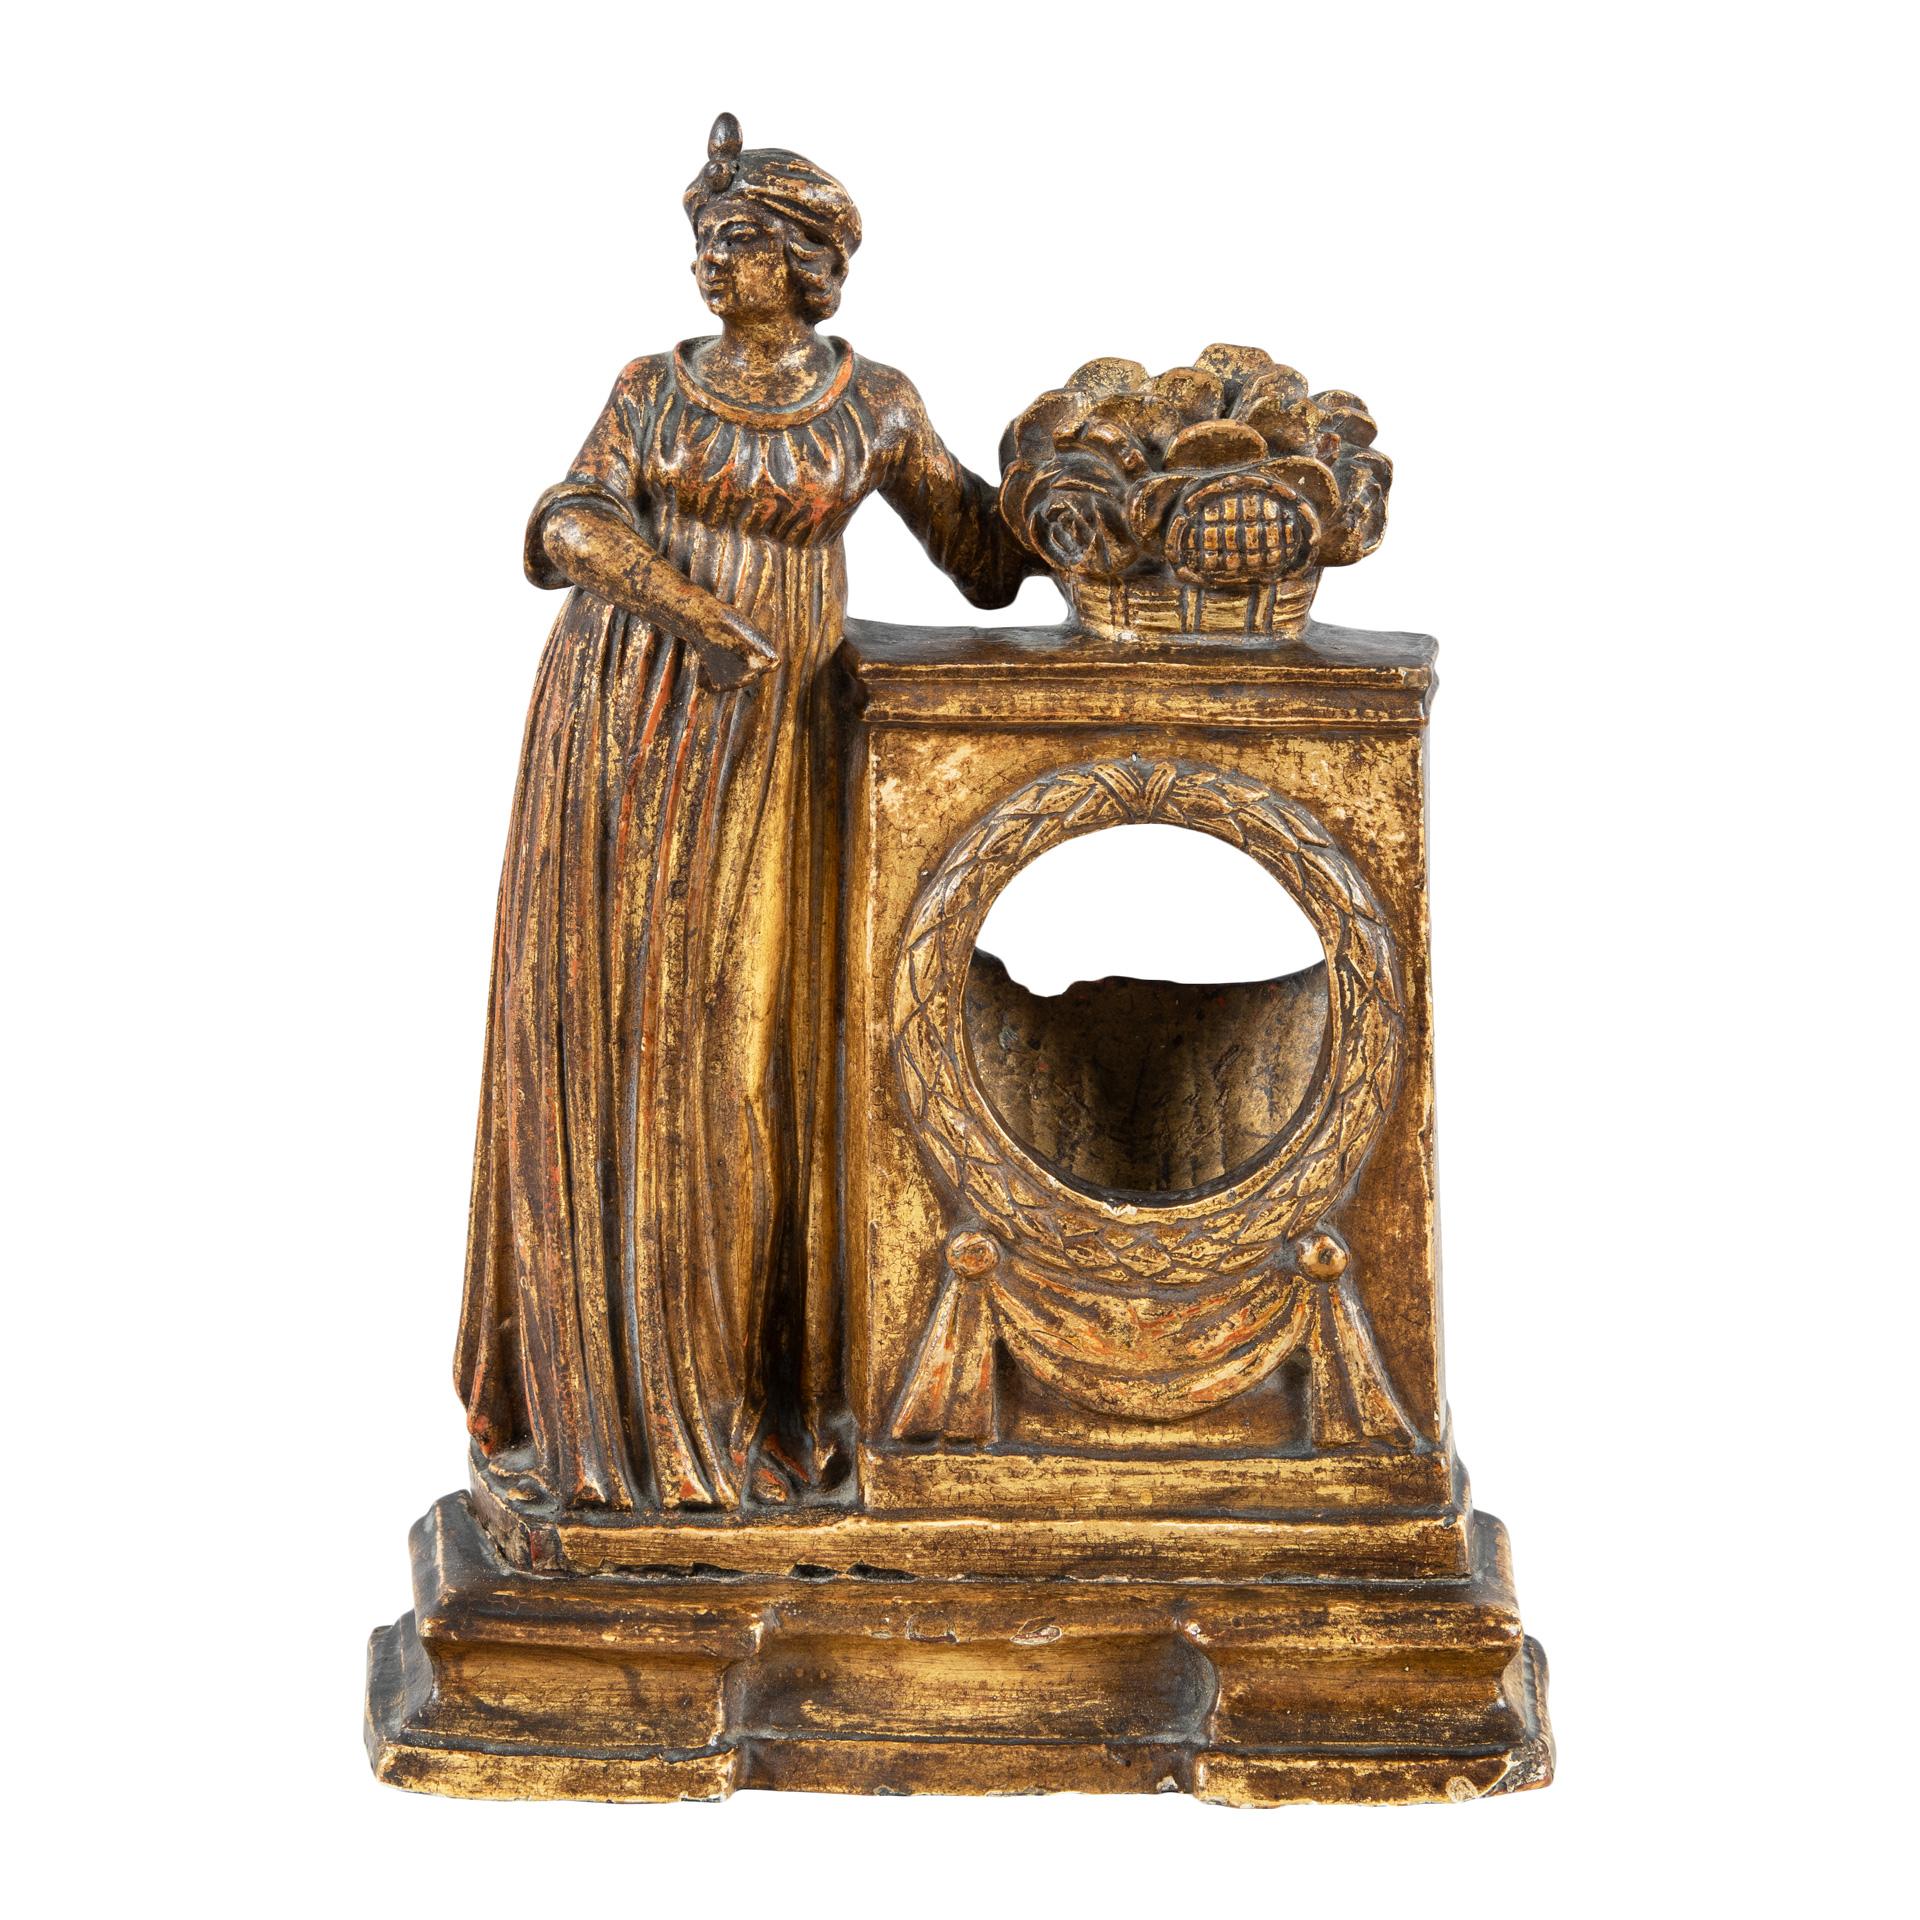 Unknown Figurative Sculpture - Late 18th century Venetian figure sculpture - Watch holder - Gilded carved wood